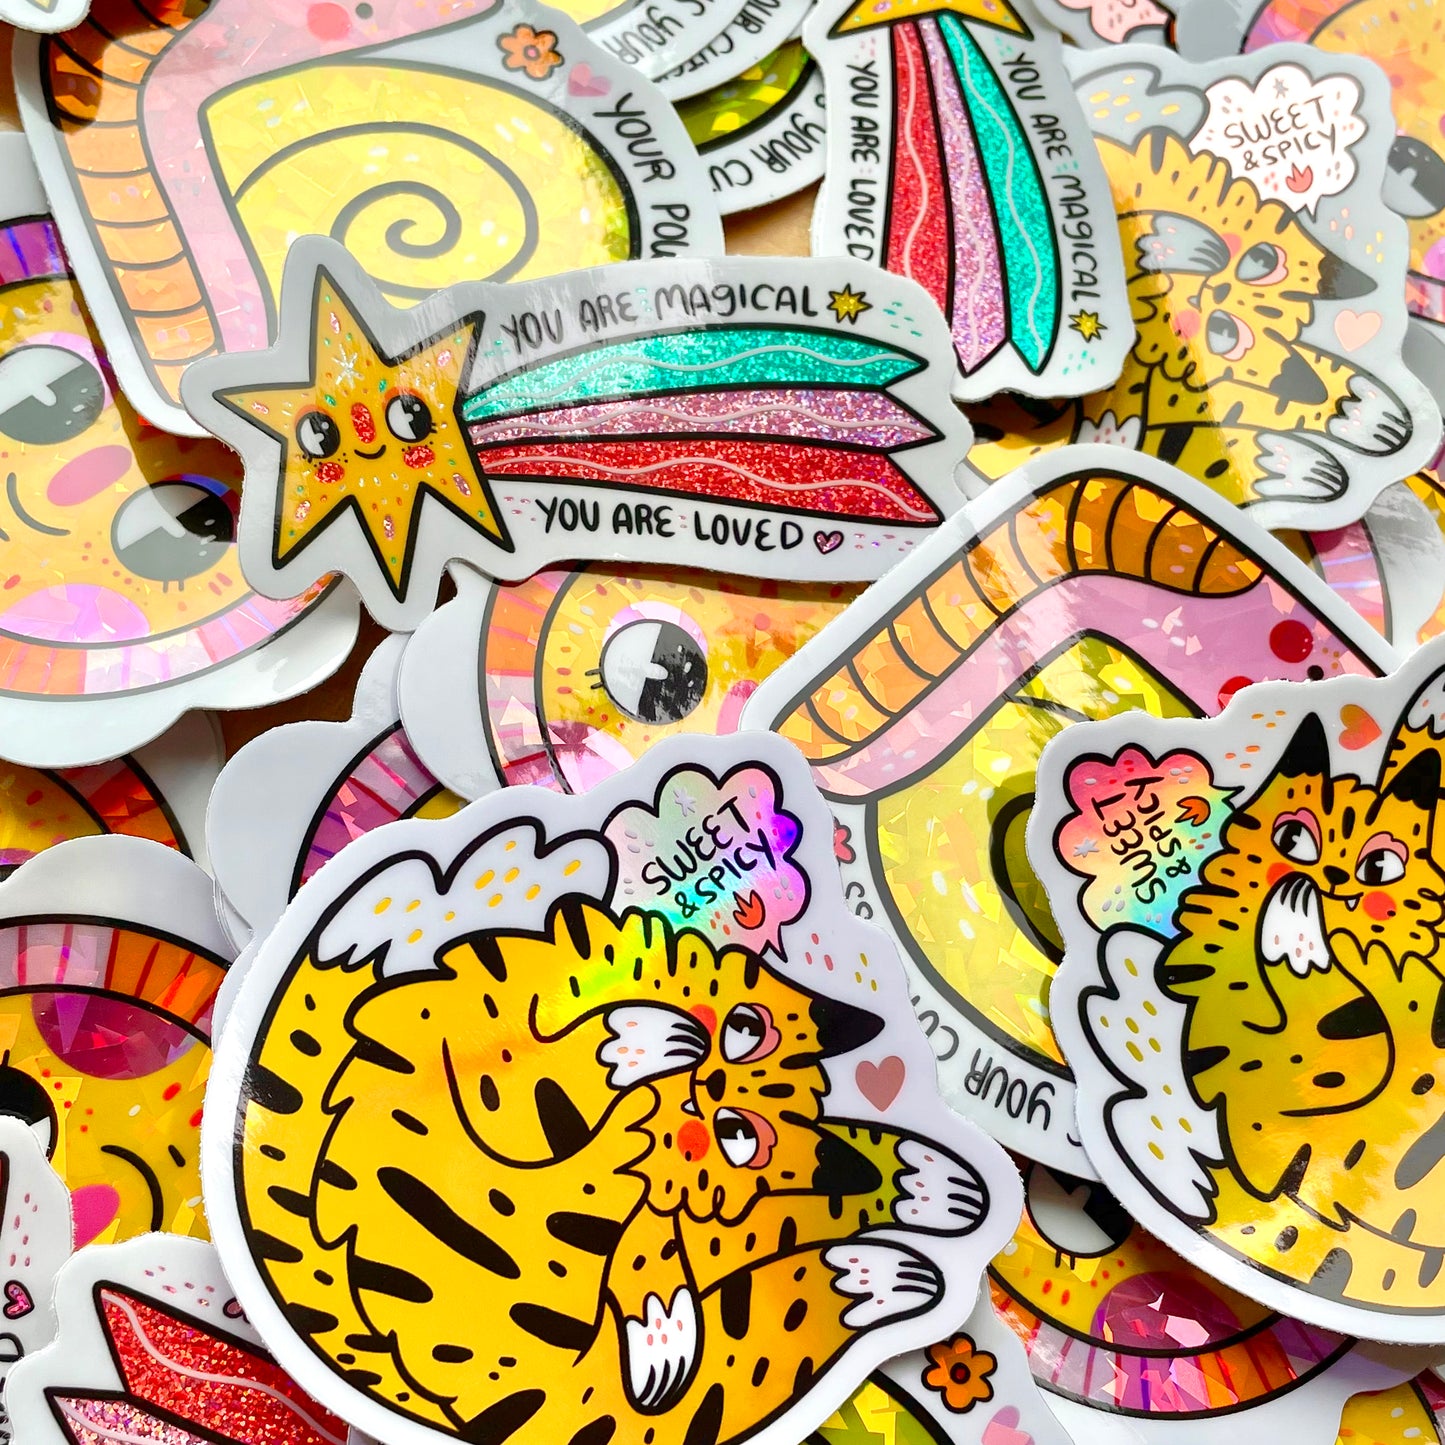 Sweet & Spicy ✷Holographic Sticker✷